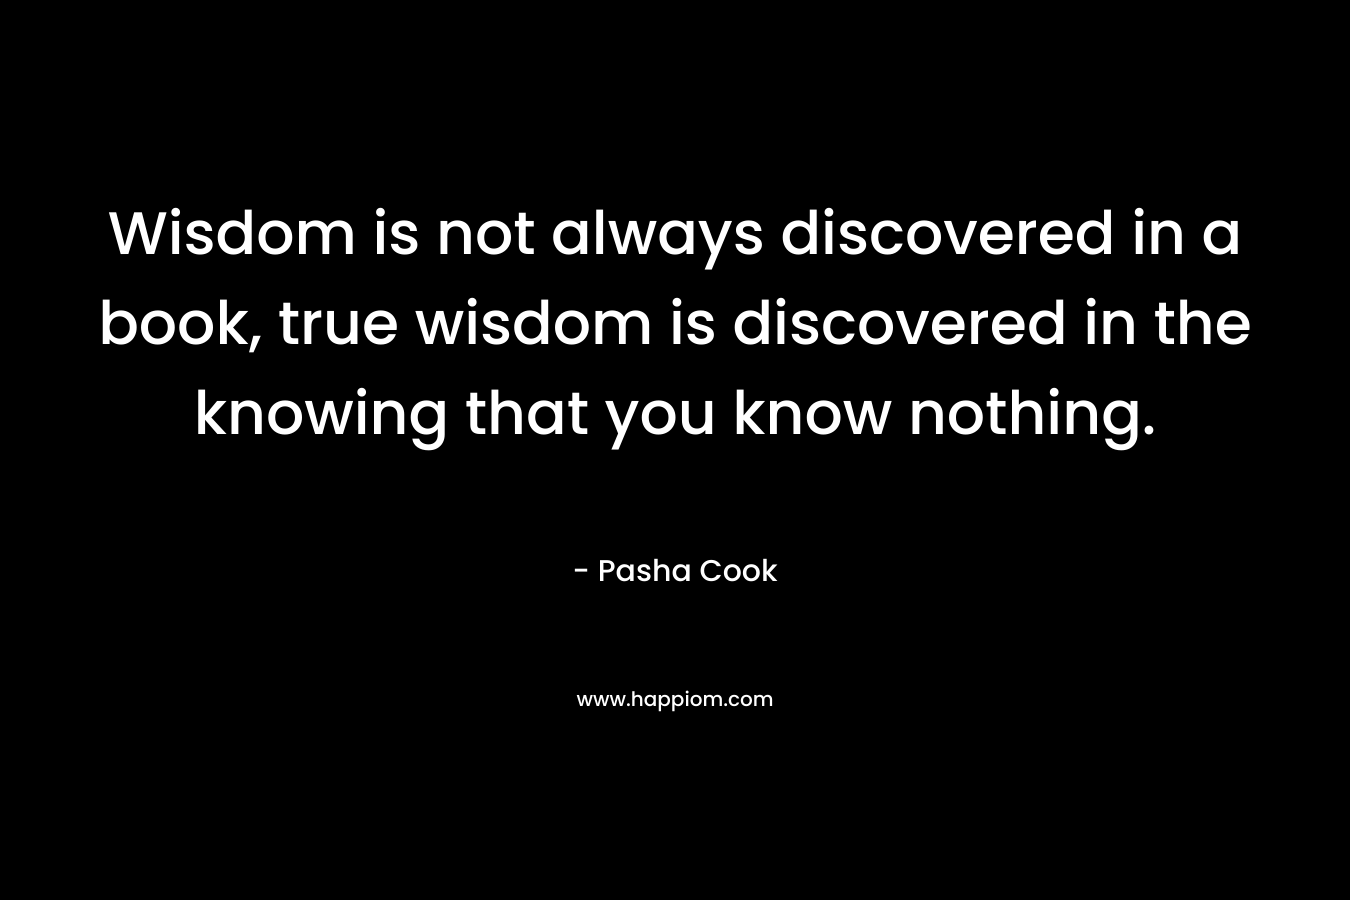 Wisdom is not always discovered in a book, true wisdom is discovered in the knowing that you know nothing.